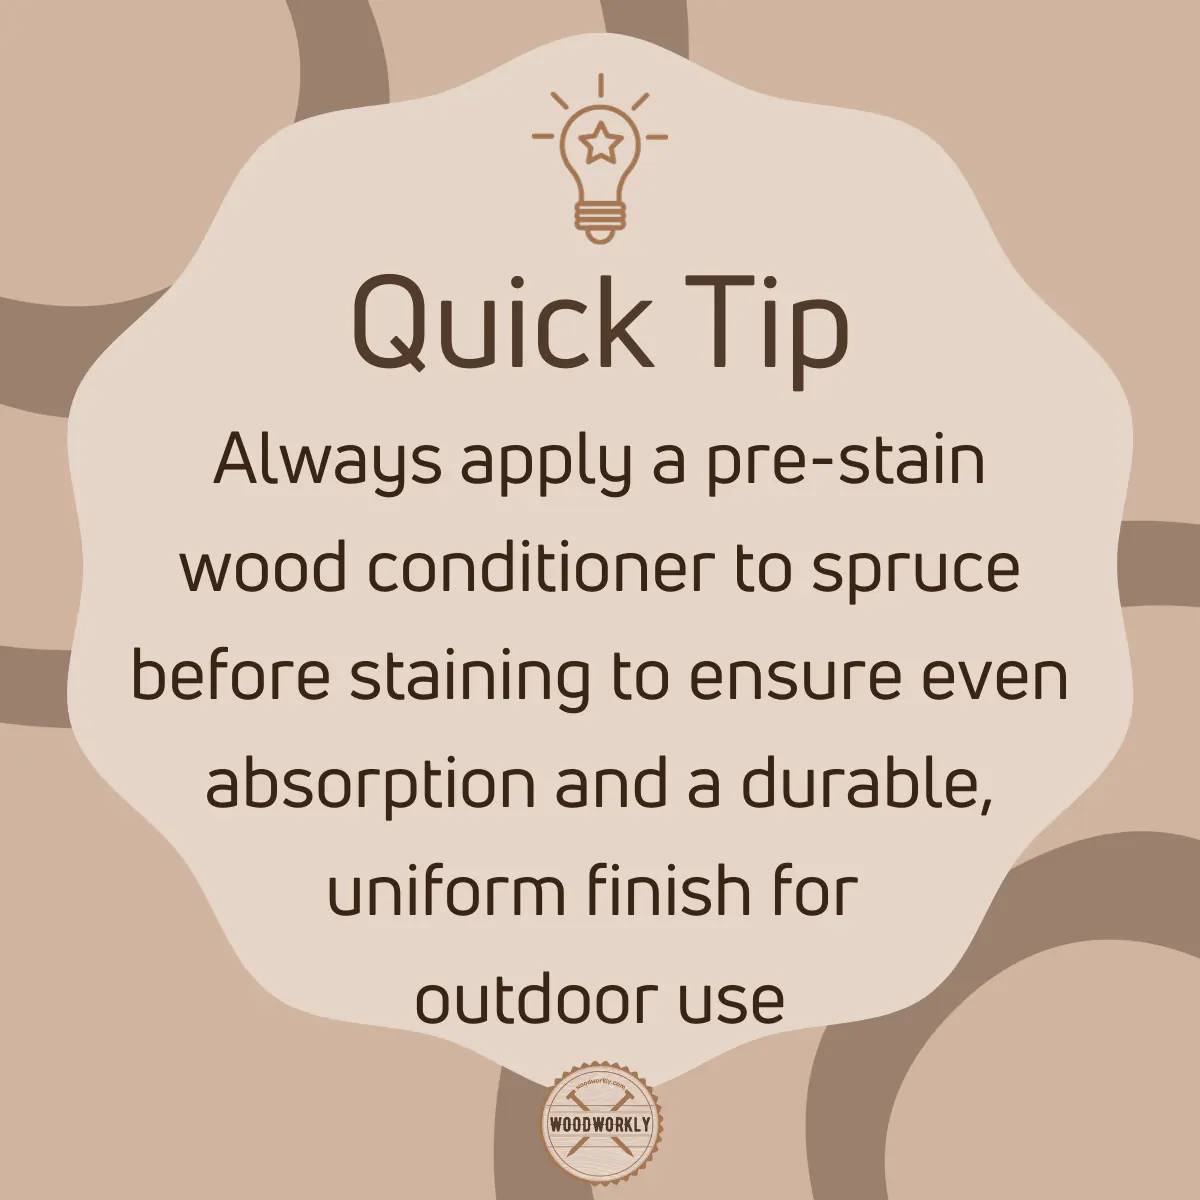 Tip for finishing spruce for outdoor use